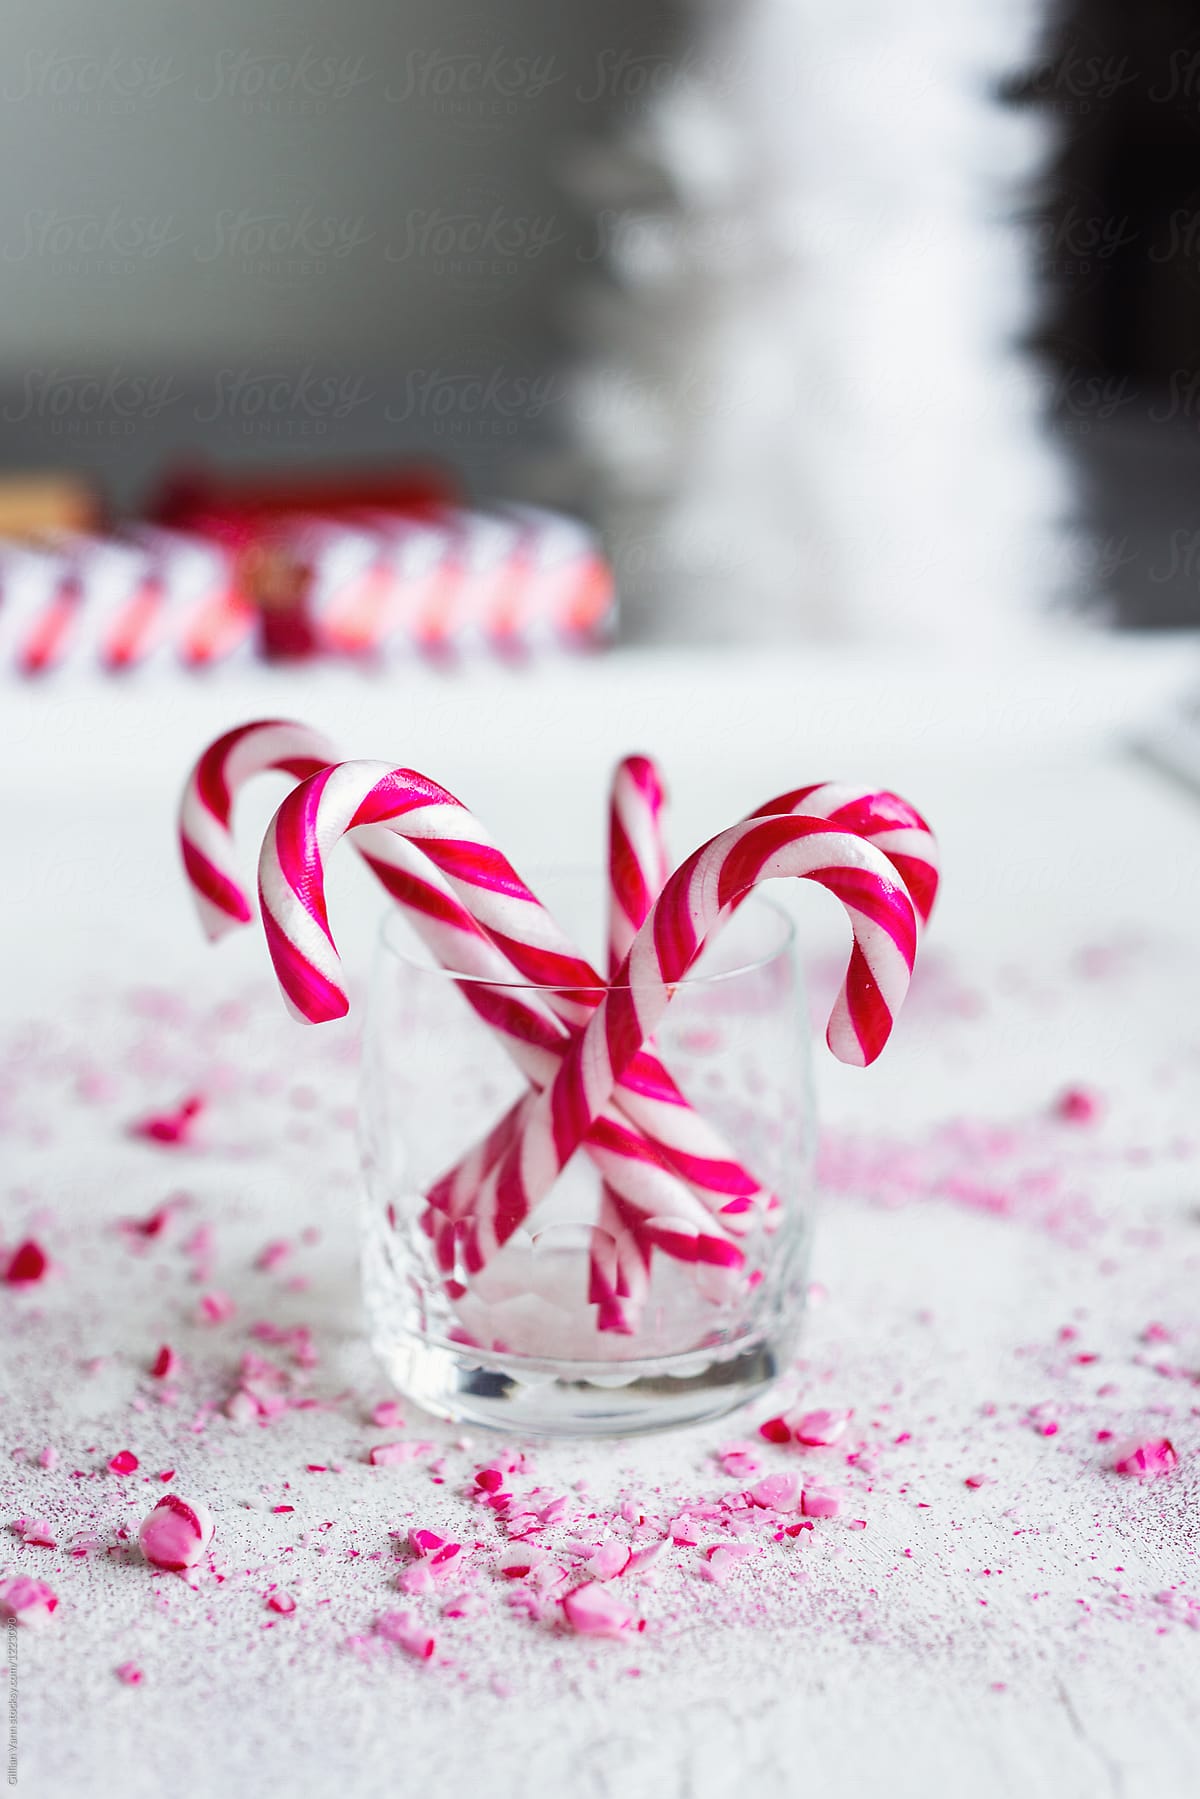 xmas candy canes in a glass